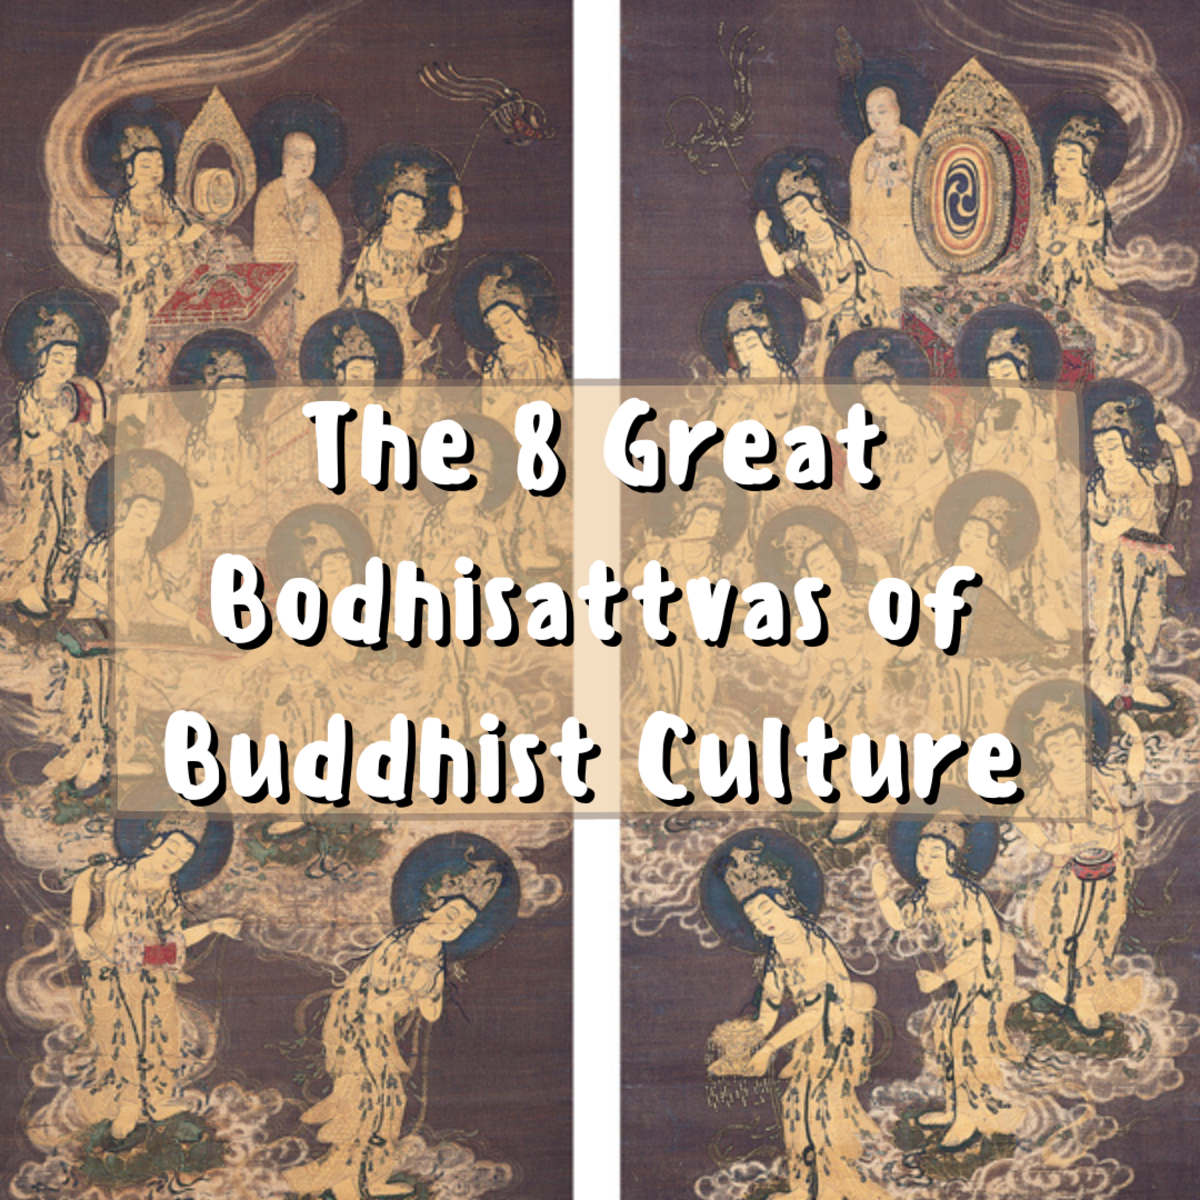 Read on to learn about the eight great bodhisattvas of Buddhist culture.